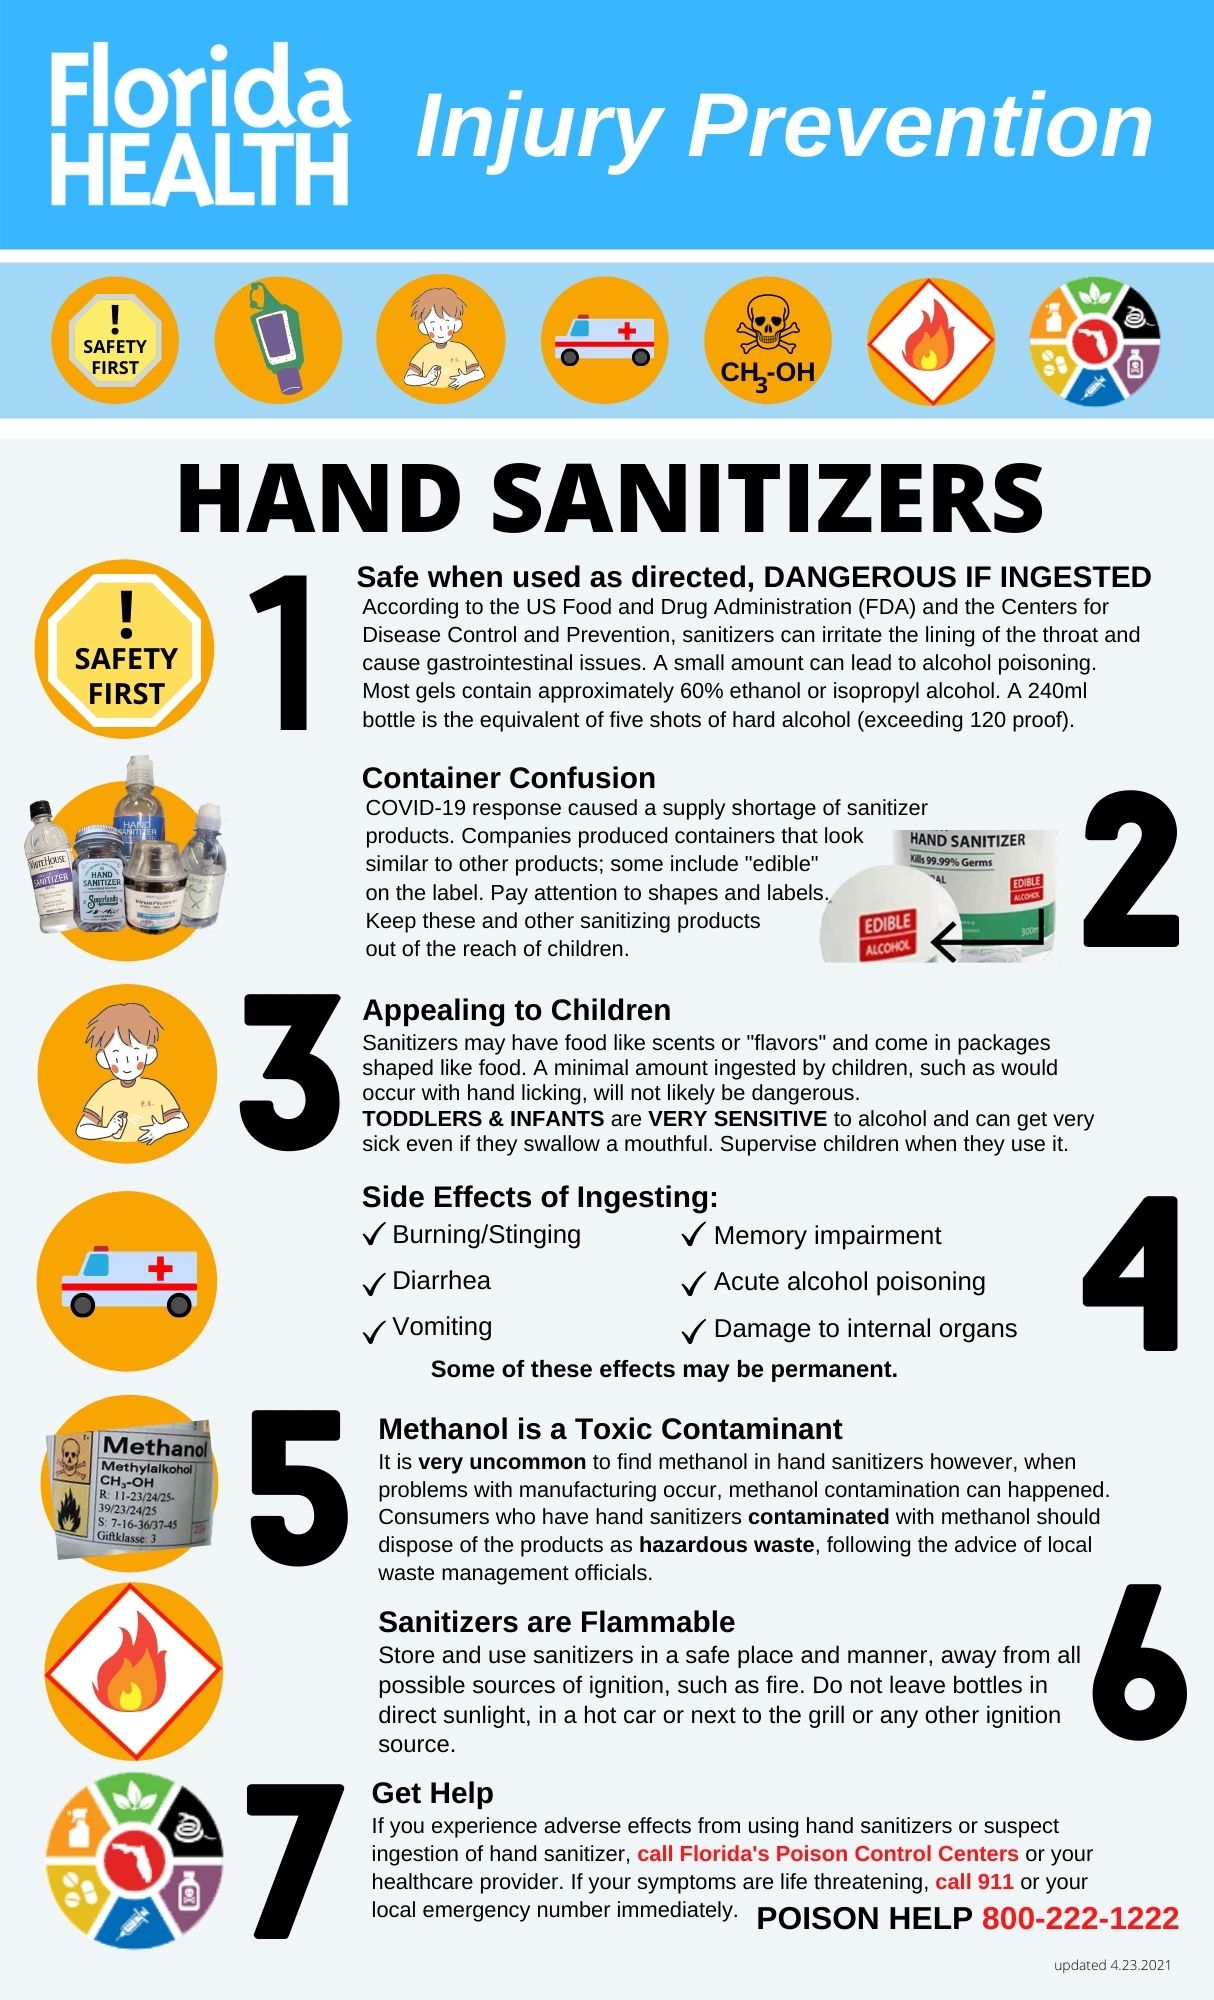 This is a thumbnail image linked to a .pdf file of seven things you should know about hand sanitizer poisoning.